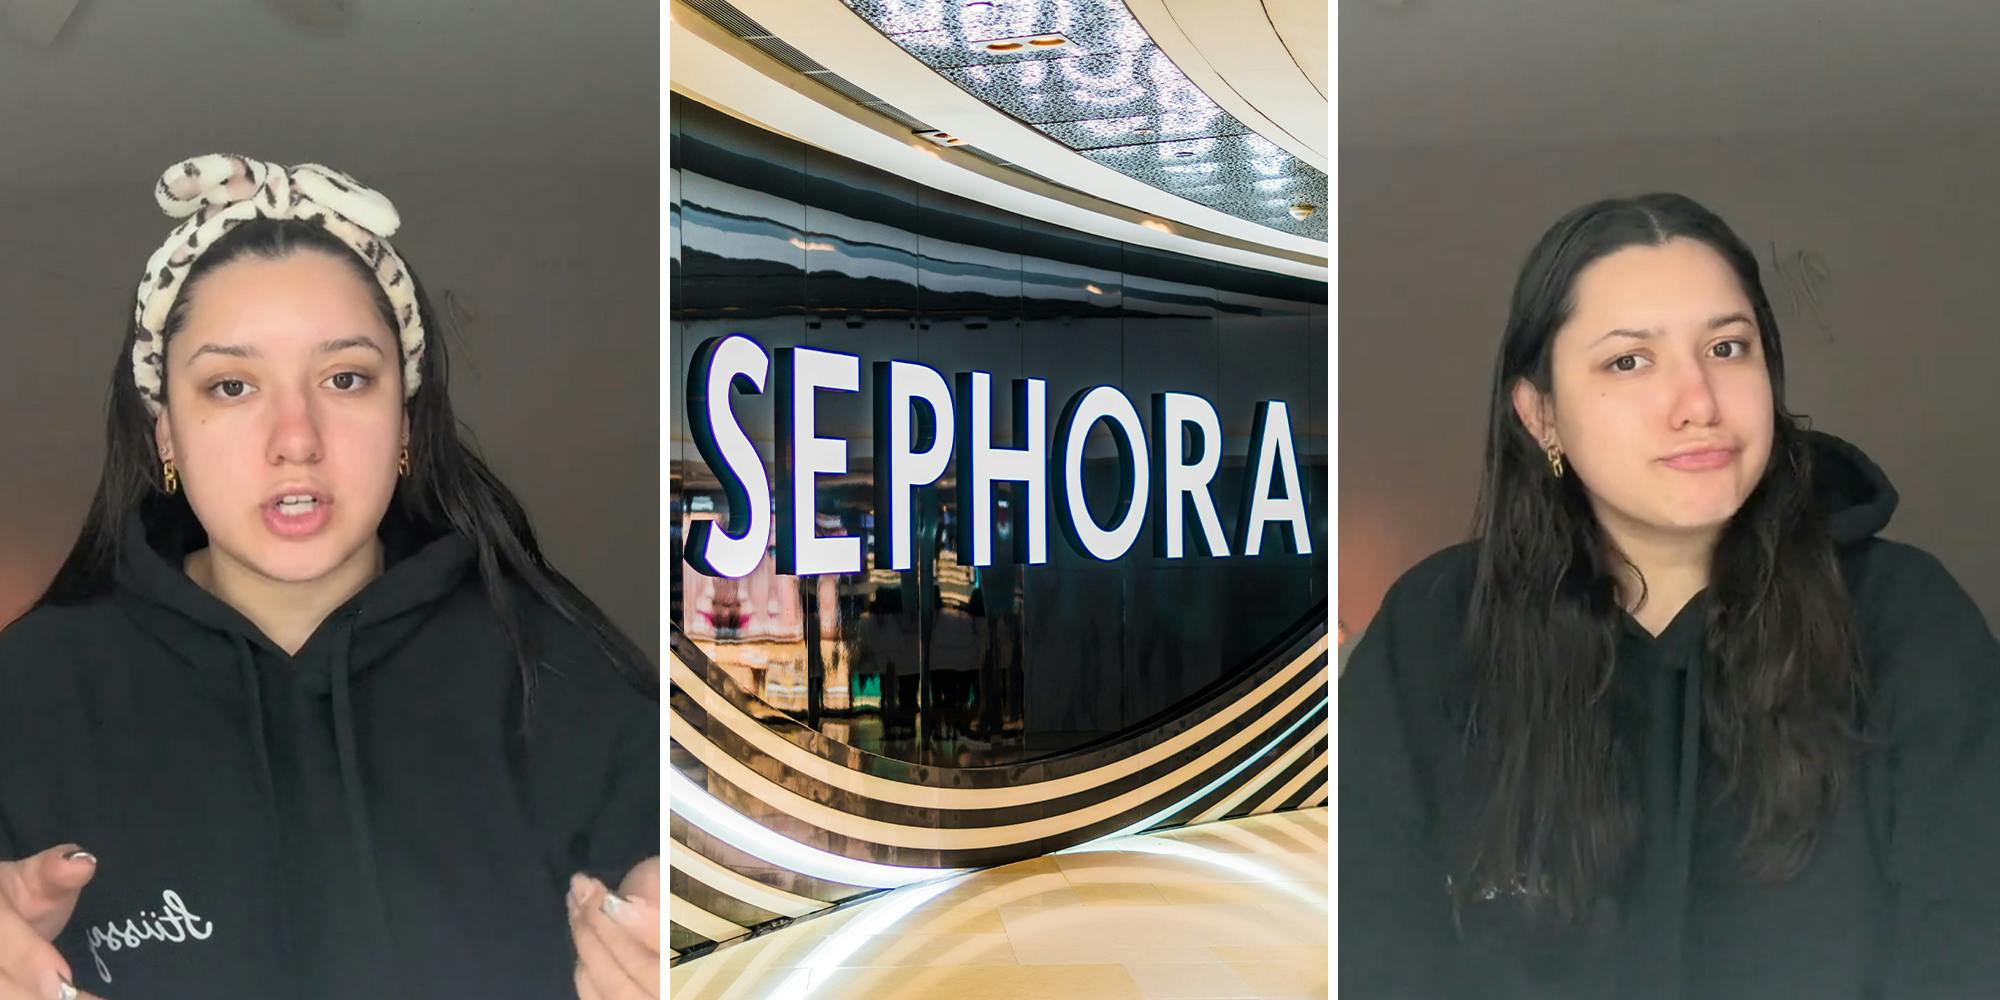 Sephora Worker Says 10 Year Olds Should Not Be Shopping There